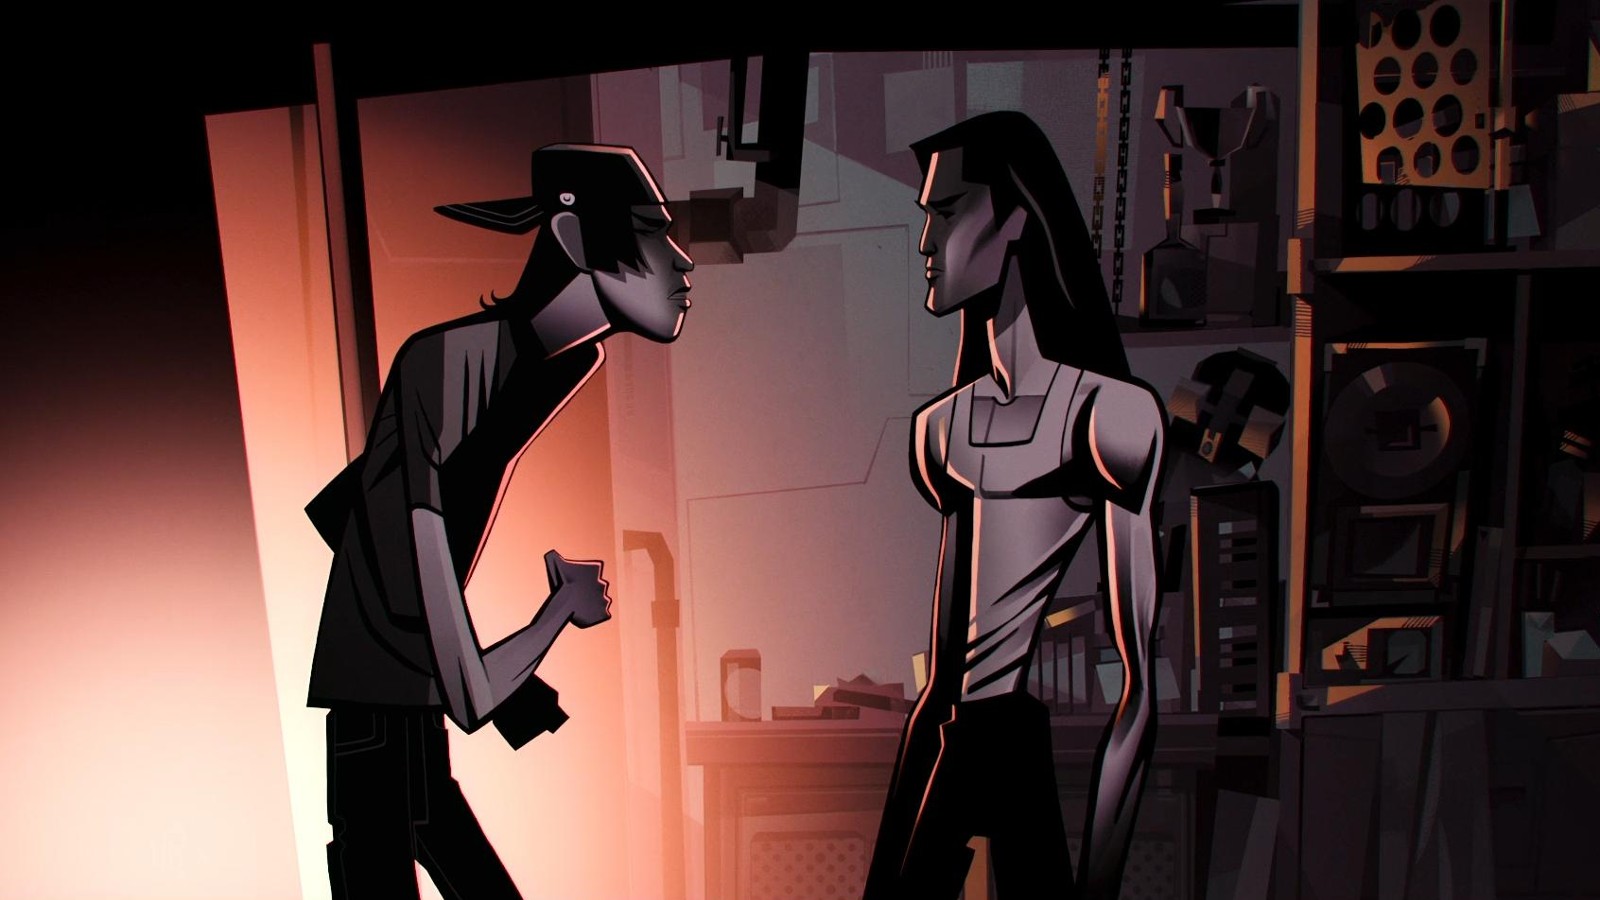 Screenshot from the animated tv series Love, Death & Robots. This still is from the episode Ice. Here we see two brothers facing off against each other in a dark bedroom. The brother on the left is wearing a t-shirt and a backwards cap. The brother on the right has long dark hair and is wearing a white vest.